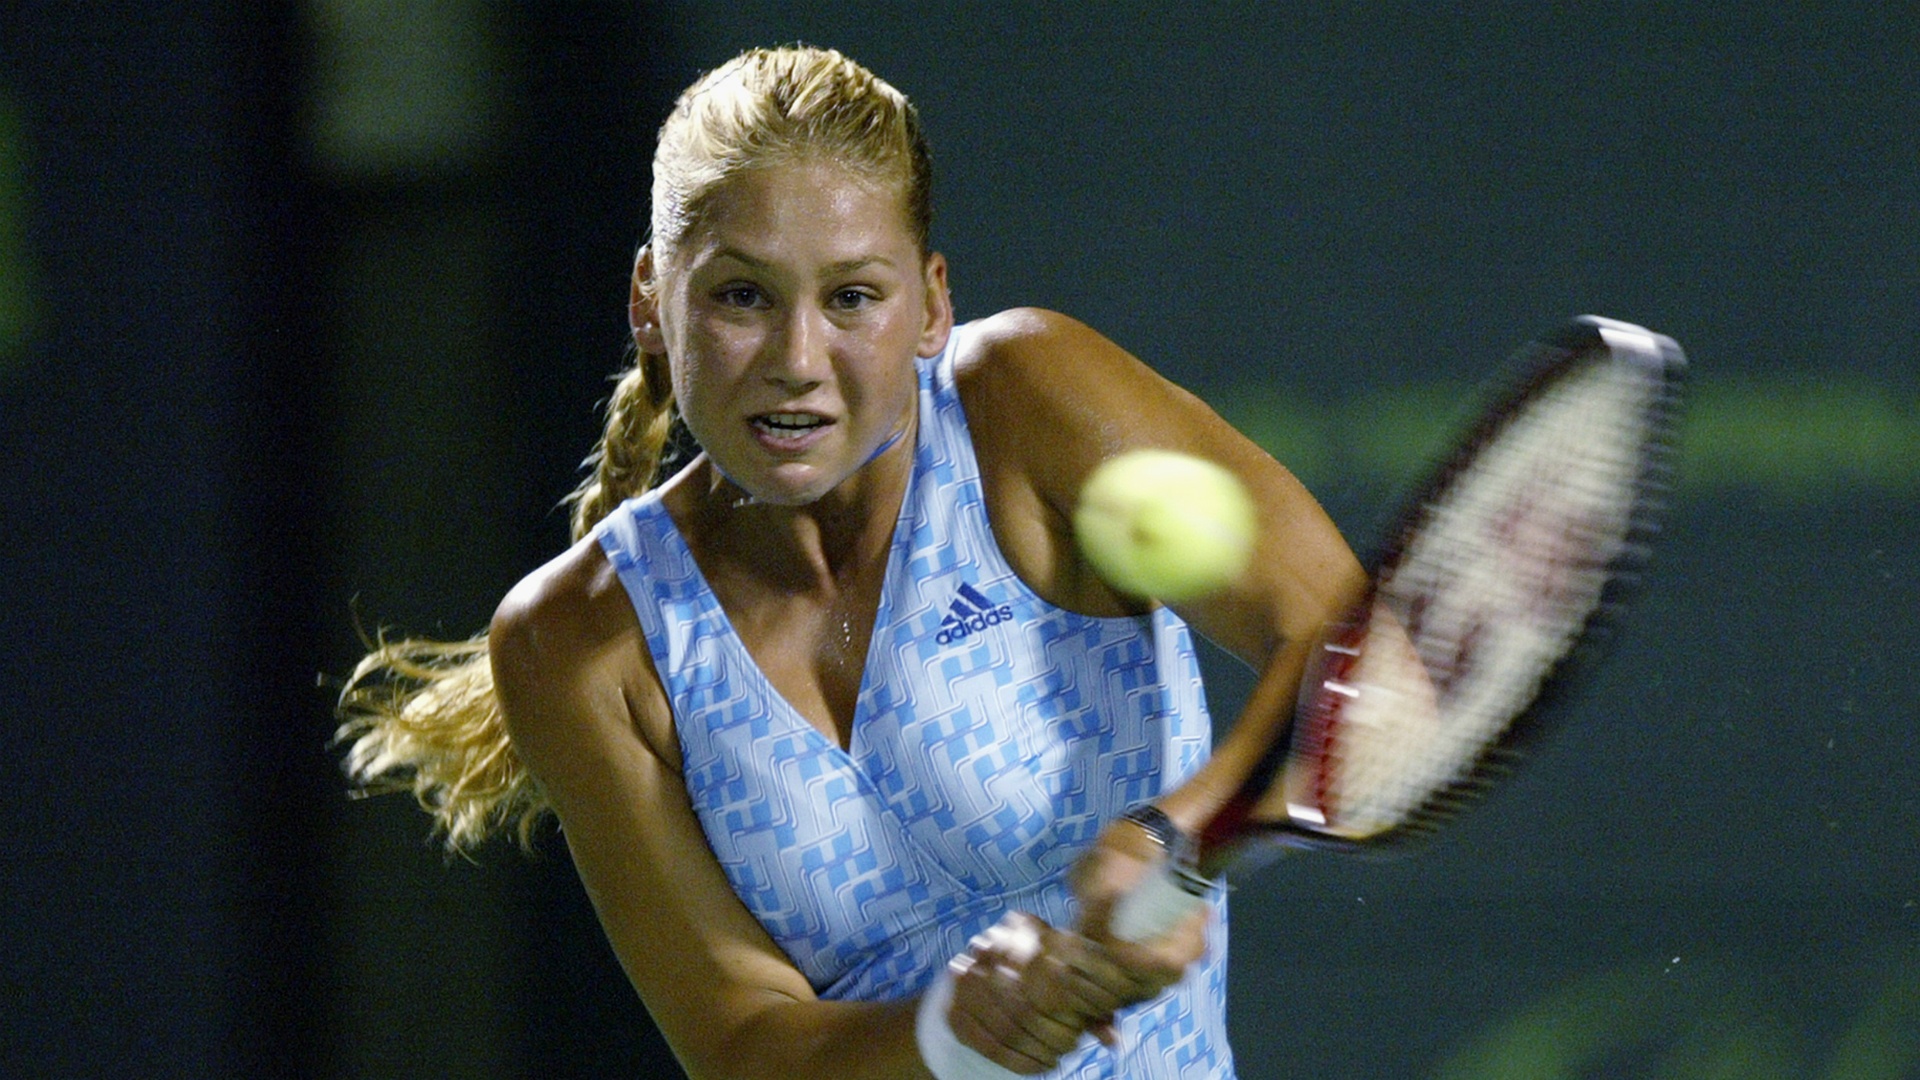 Anna Kournikova: The end of the road in Charlottesville, and how the Russian started again